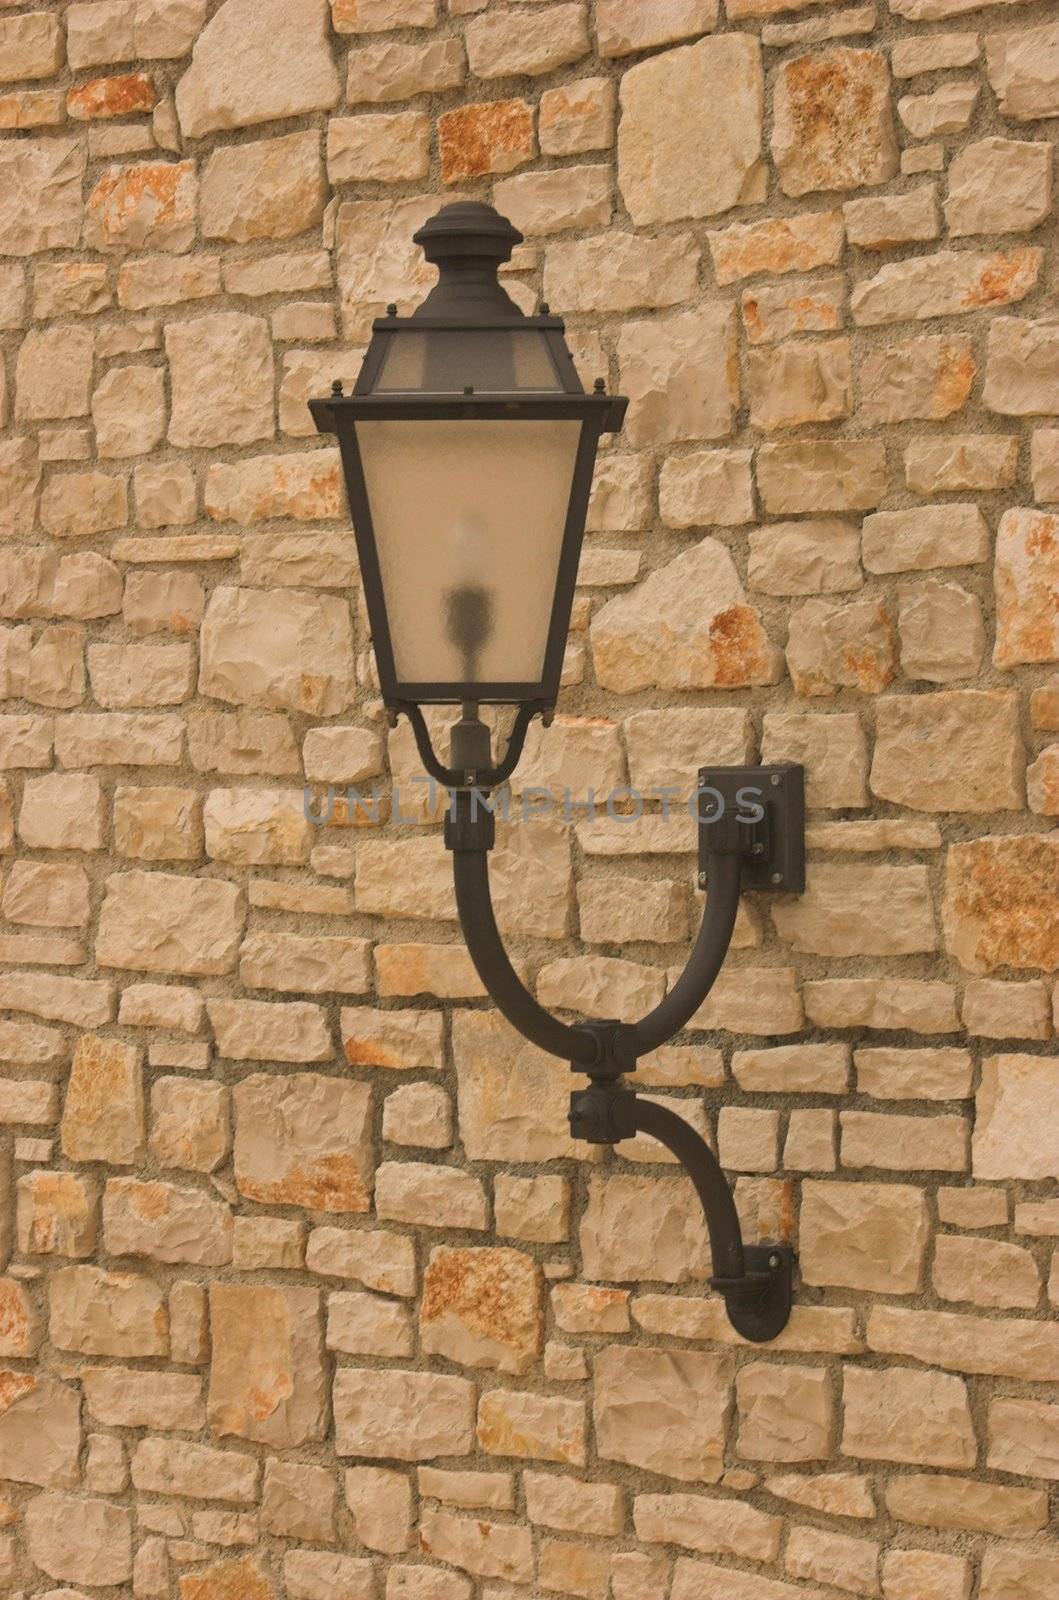 Electric lantern in old style hanging on a wall